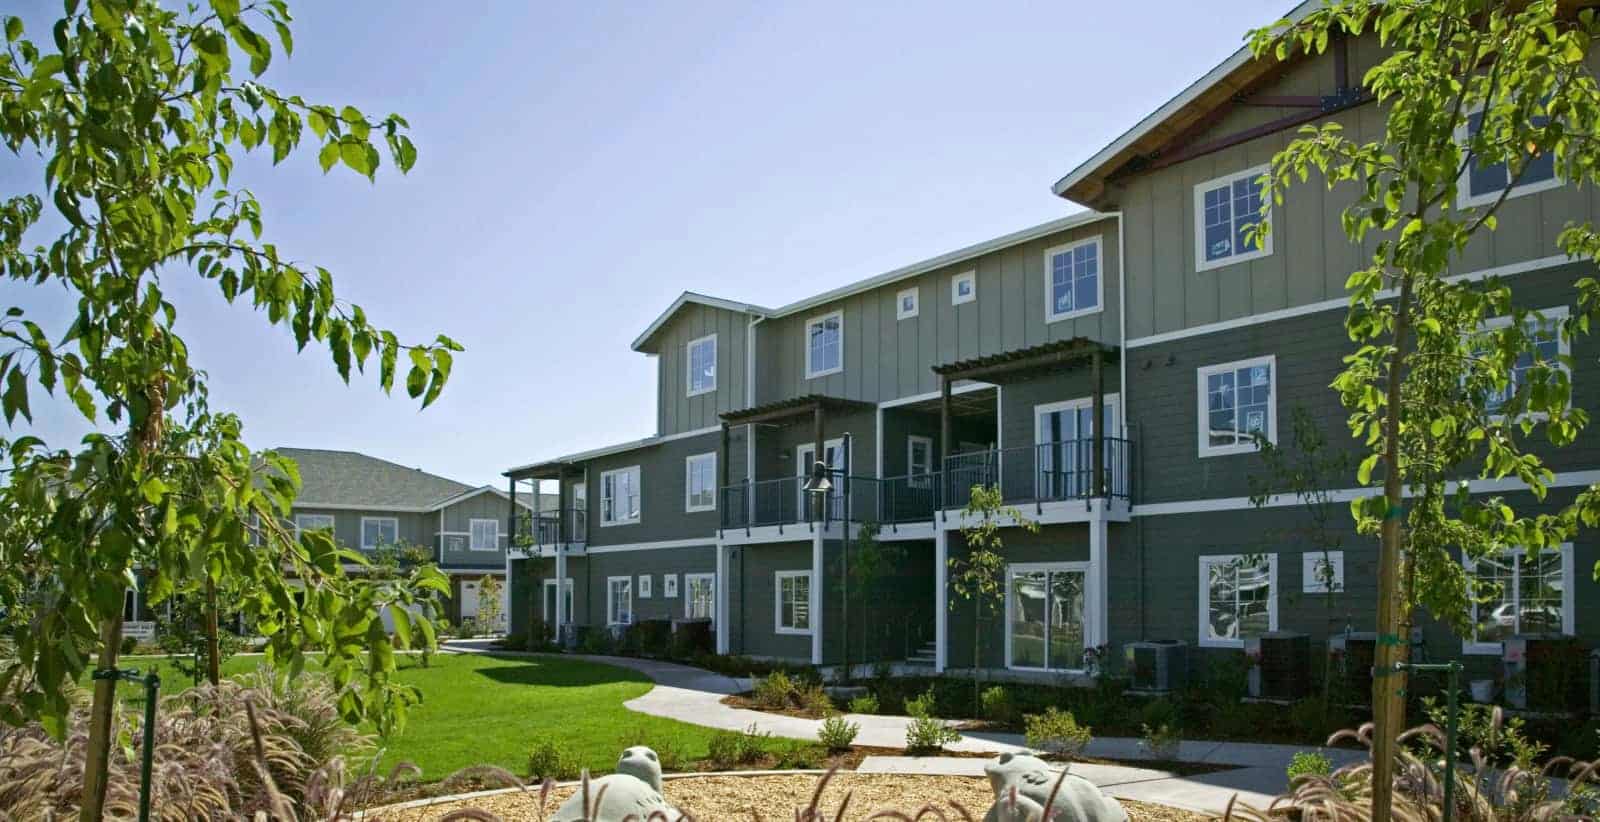 Exterior of 3 story apartment building with a lawn and landscaping in the foreground.